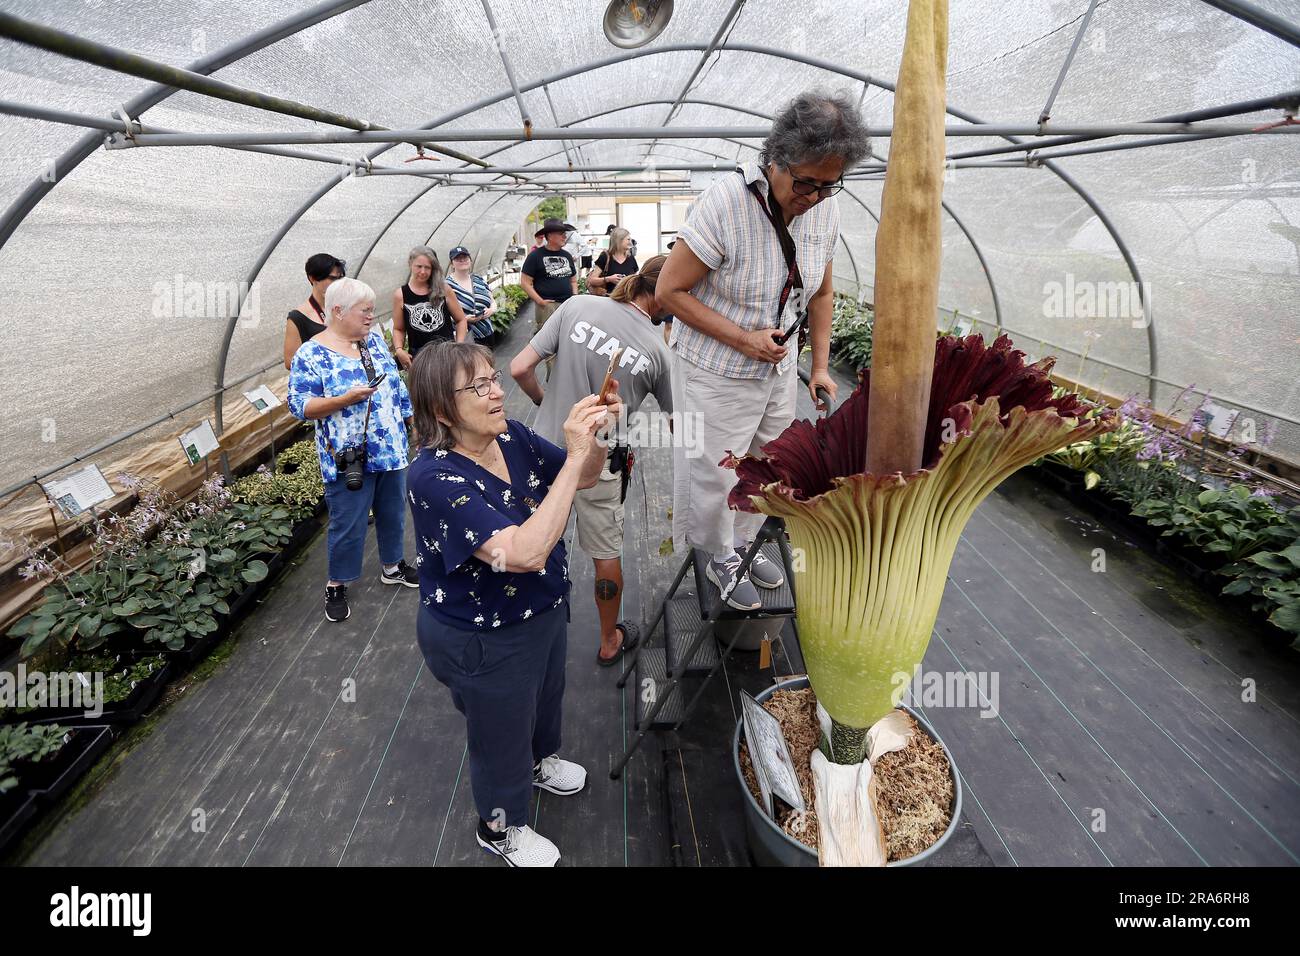 July 1, 2023, Raleigh, North Carolina, USA: Visitors line up to take a sniff of ''˜HOMO ERECTUS, ' a rare corpse flower during the second day of its bloom at Juniper Level Botanical Garden in Raleigh, NC. Amorphophallus titanum is one of the biggest, stinkiest flowers in the plant kingdom and is commonly known as the corpse flower due to its smell of rotting flesh as it blooms. It typically takes 7-10 years of vegetative growth before the corpse flower blooms for a total of 2-3 days. The flower is so rare that fewer than 1,000 Titan Arums have flowered in cultivation worldwide. (Credit Image: Stock Photo